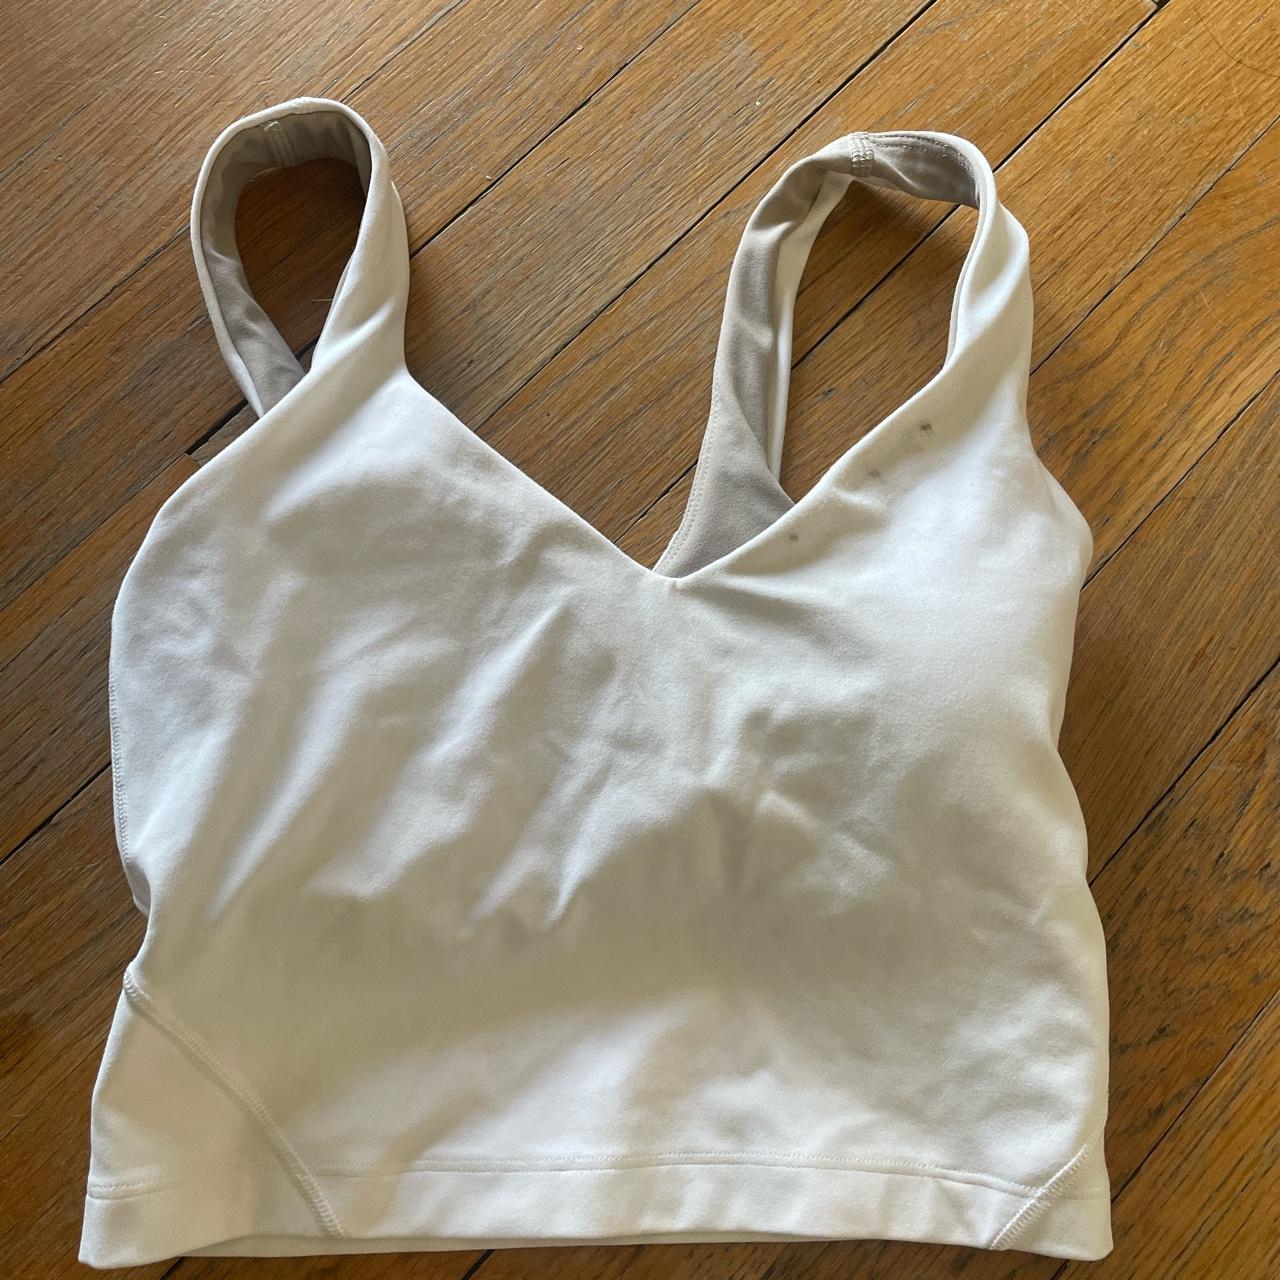 lululemon align tank top in sonic pink paypal only - Depop